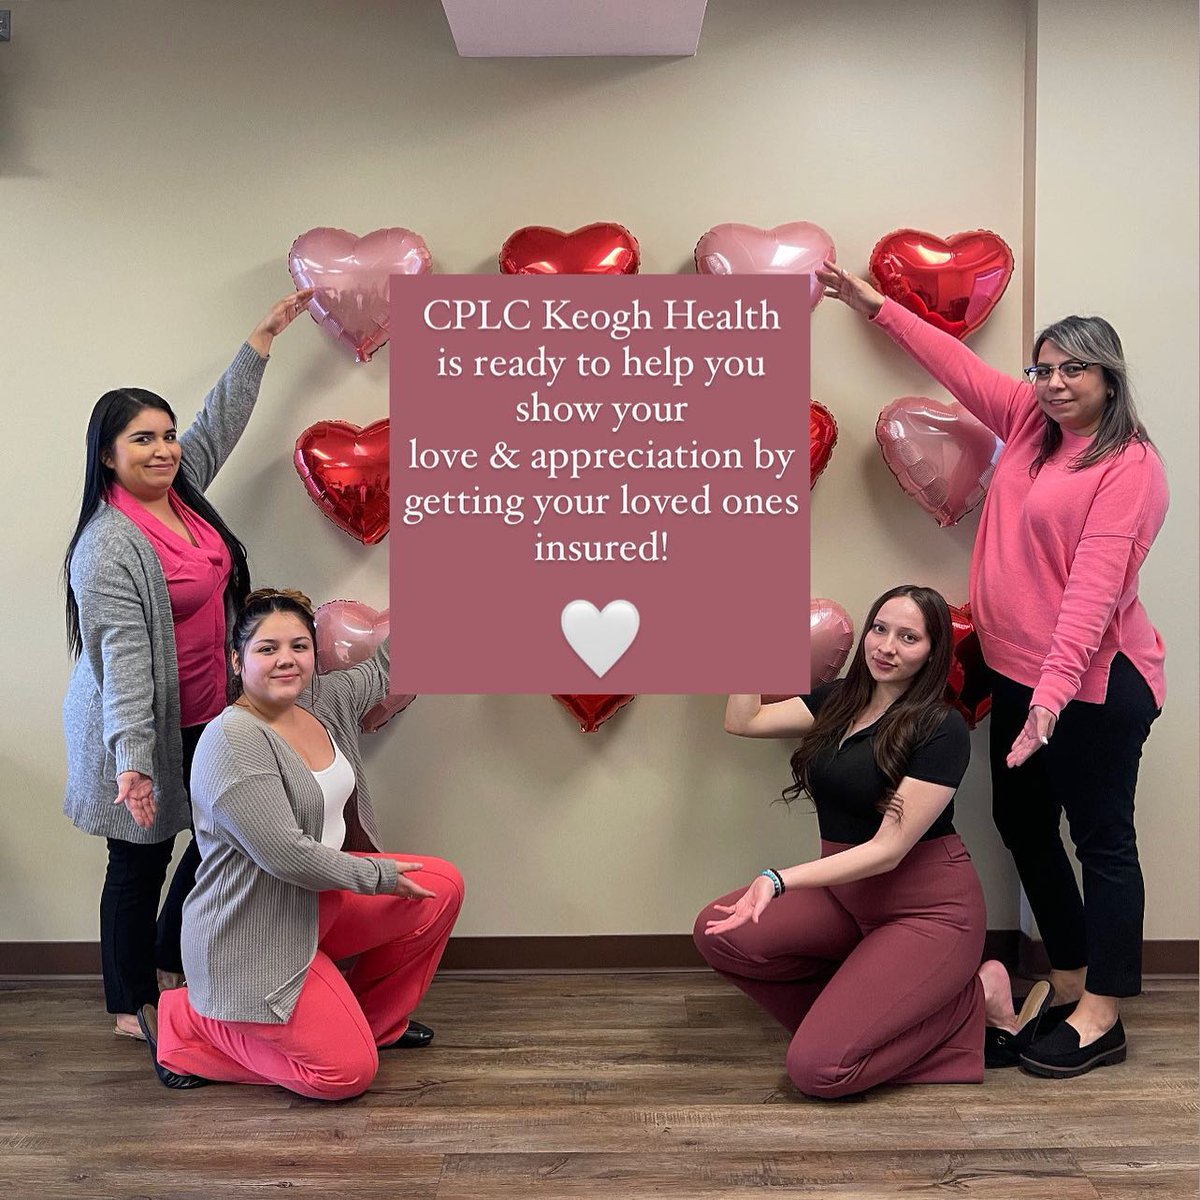 Contact CPLC Keogh Health Connection at 602-266-0397 to schedule an appointment with one of our Navigators.♥️
#medicid #chip #communityresource